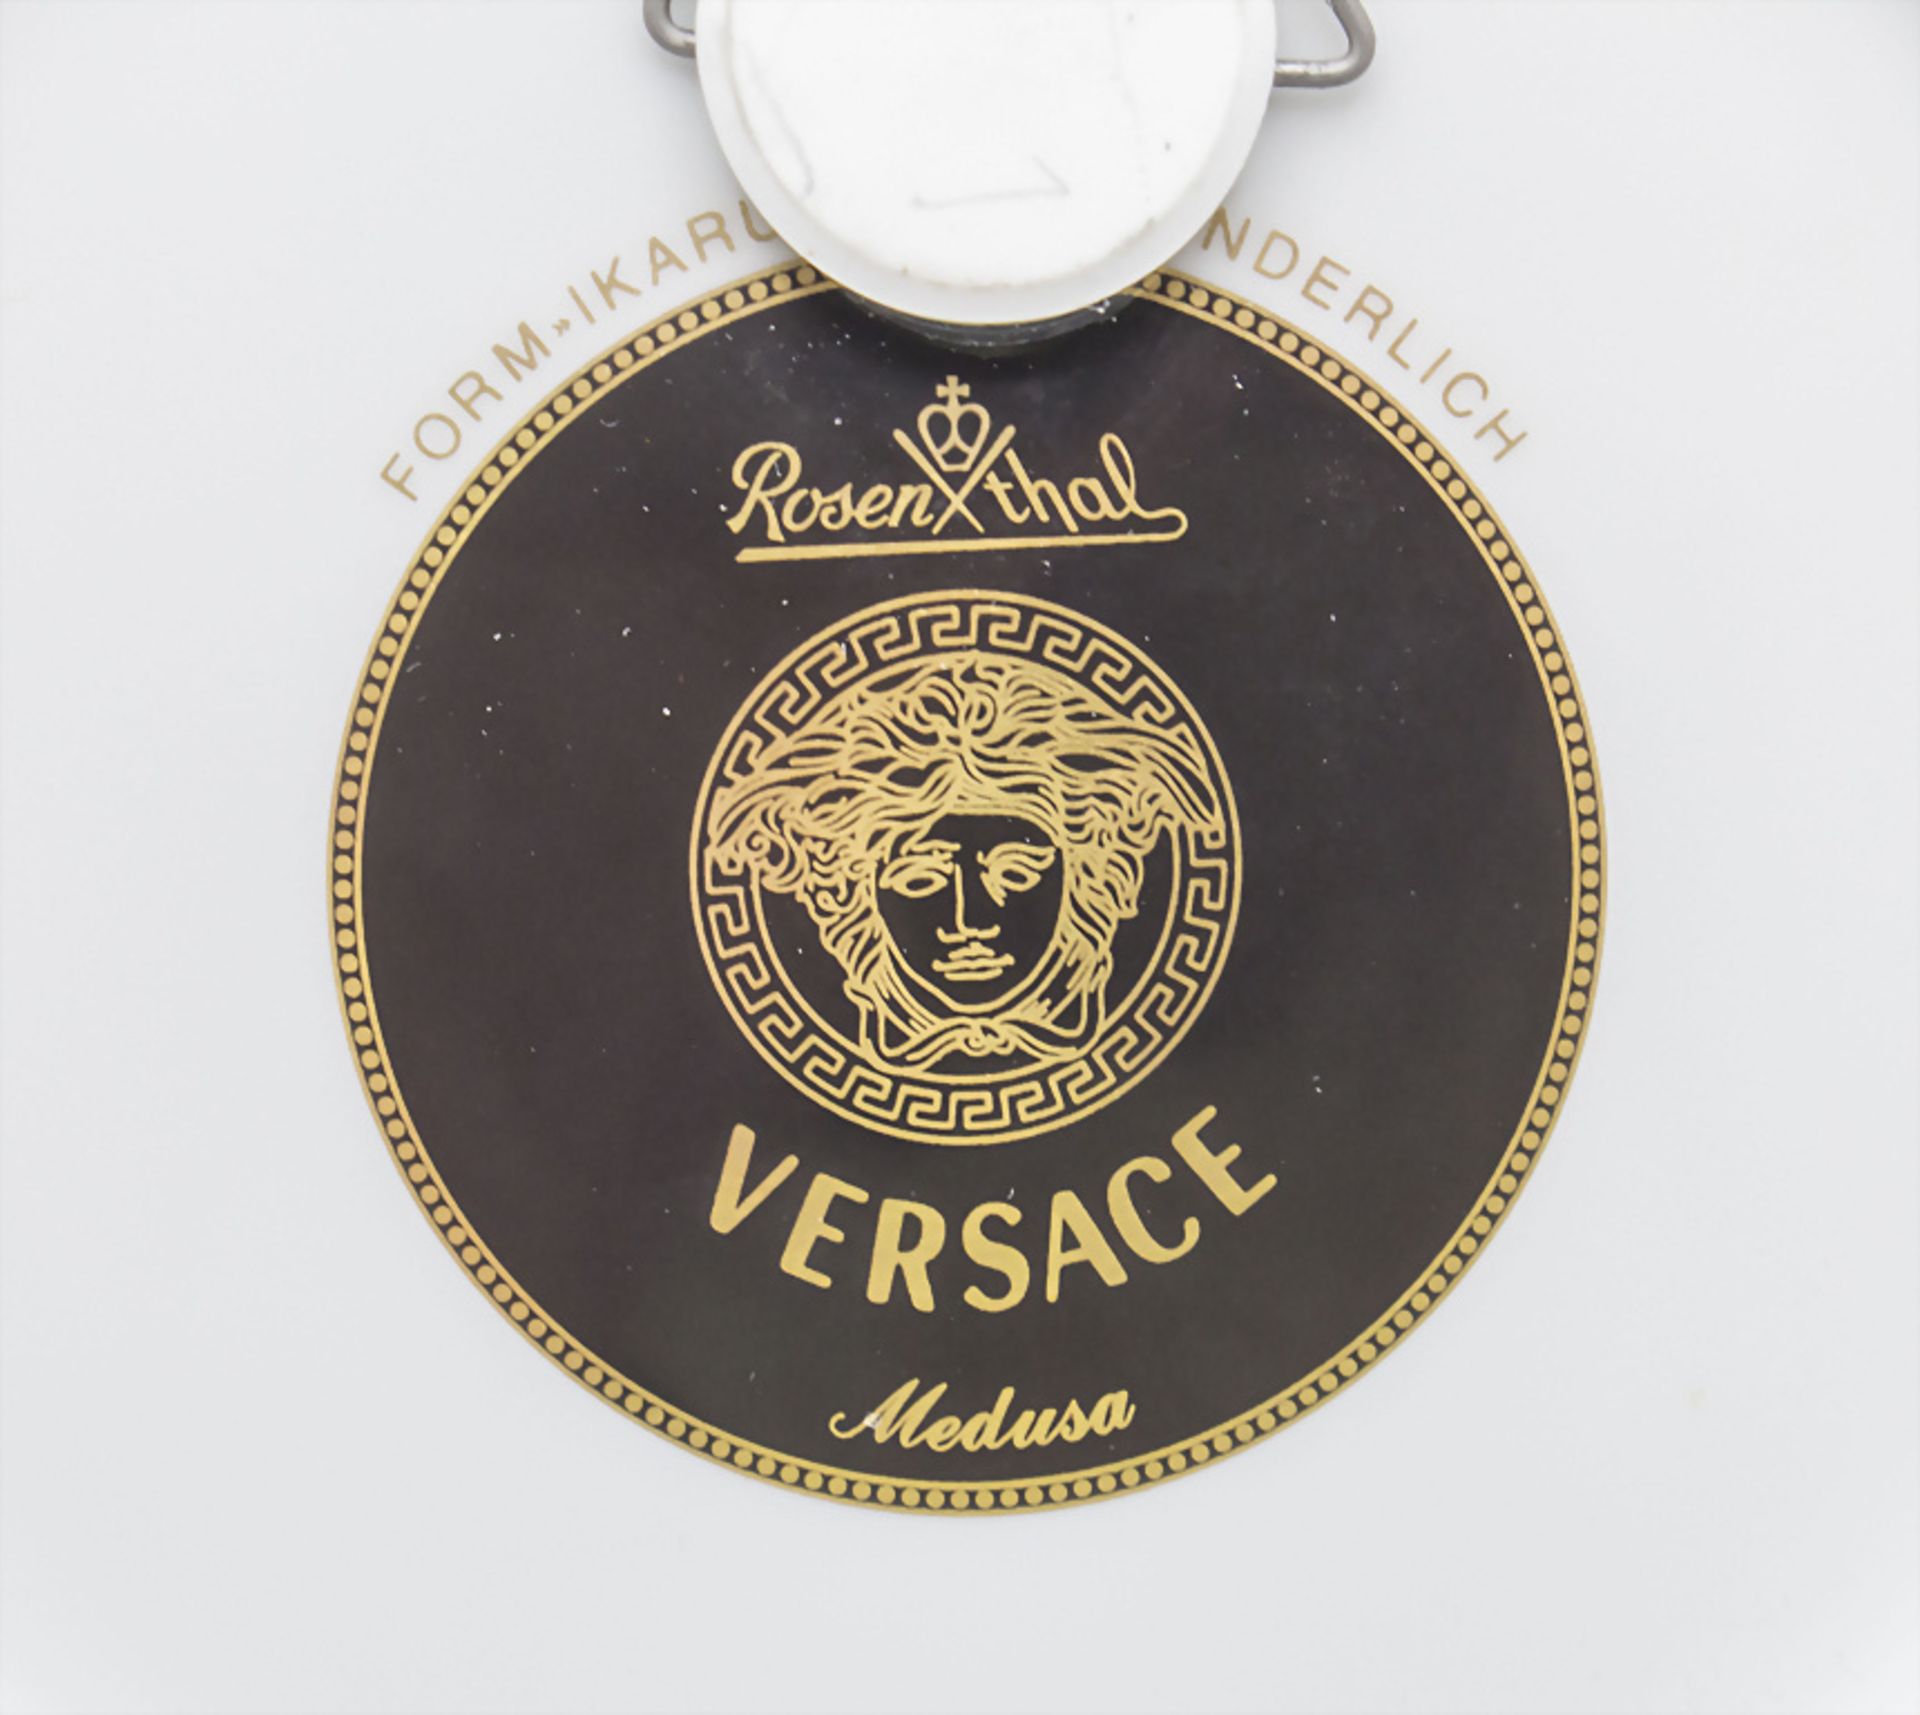 Wandteller mit Medusa-Kopf / A wall plate with the head of Medusa, Versace, Rosenthal, Ende 20. Jh. - Image 3 of 3